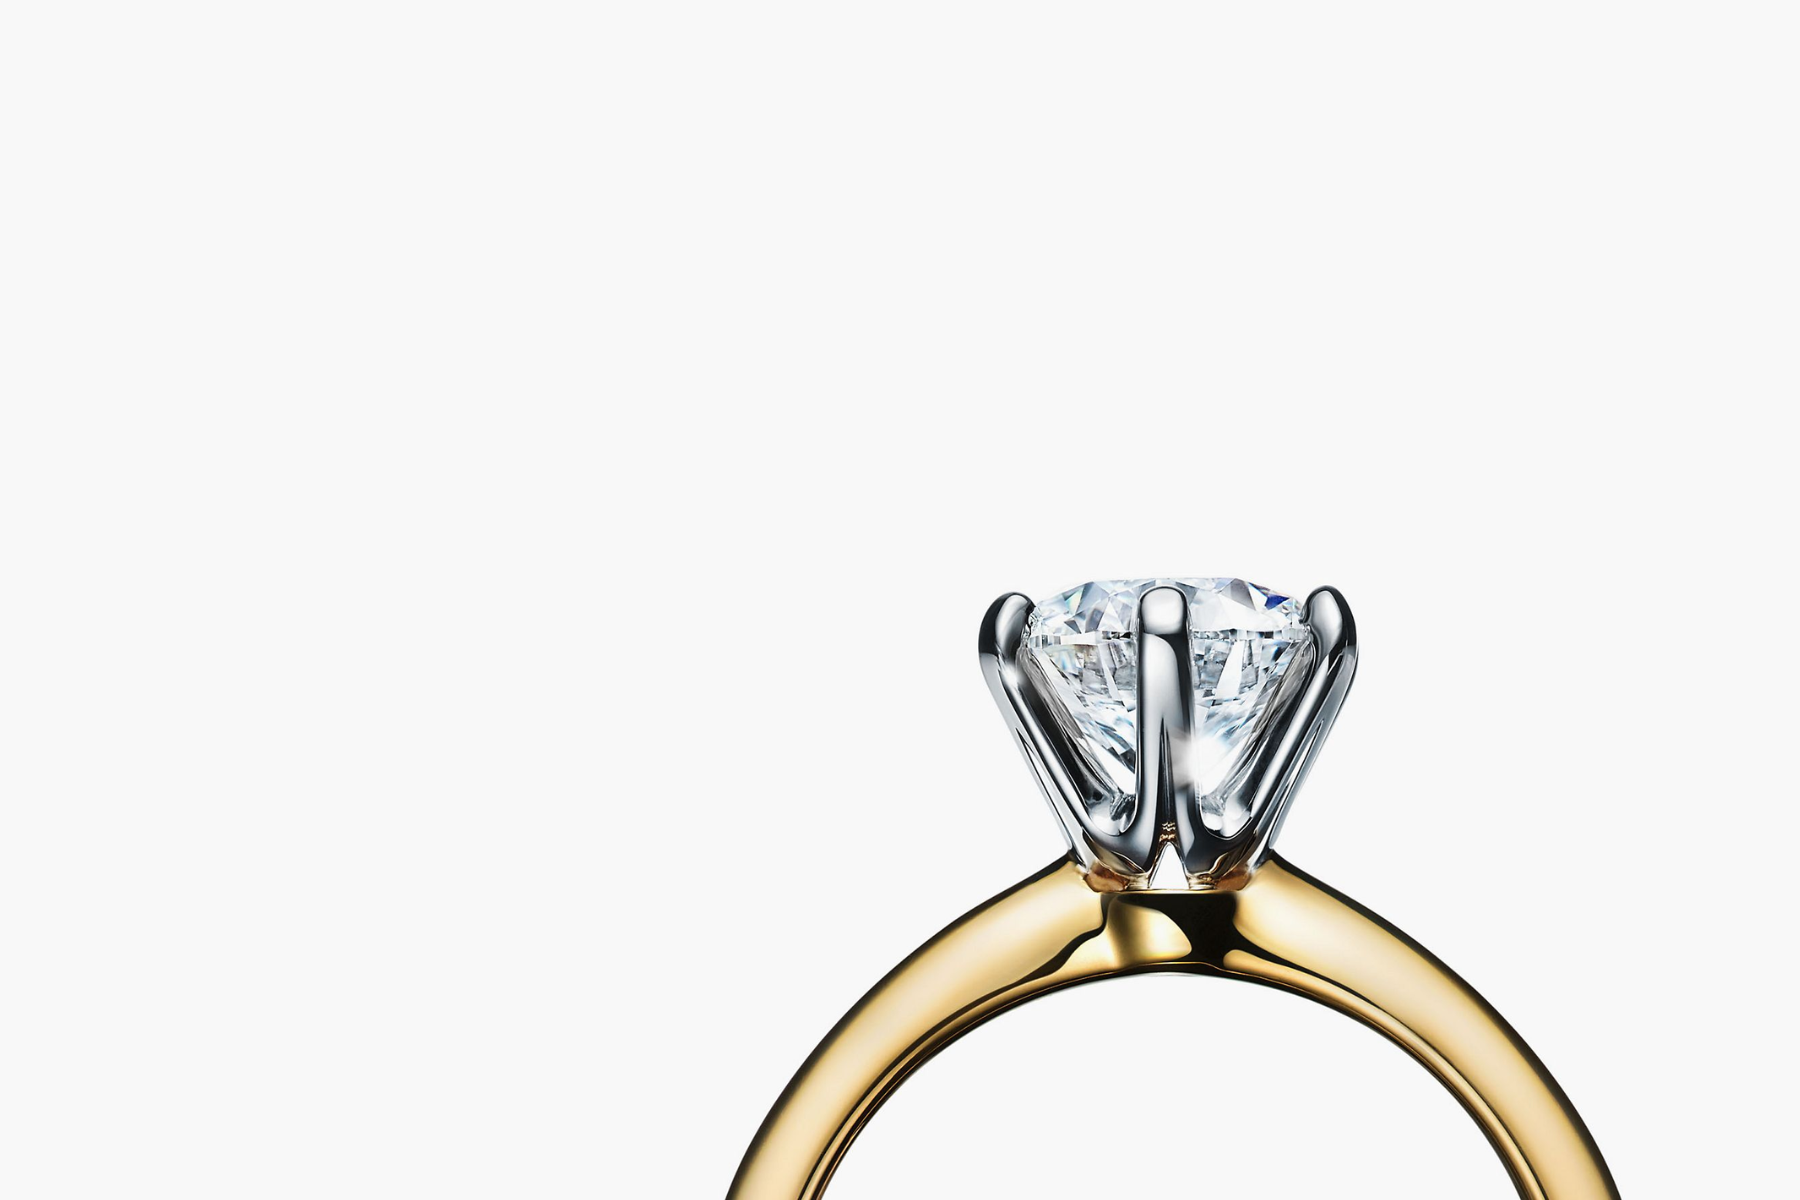 A solitaire ring setting and the ring features a single, sparkling gemstone held in place by a simple and elegant metal band